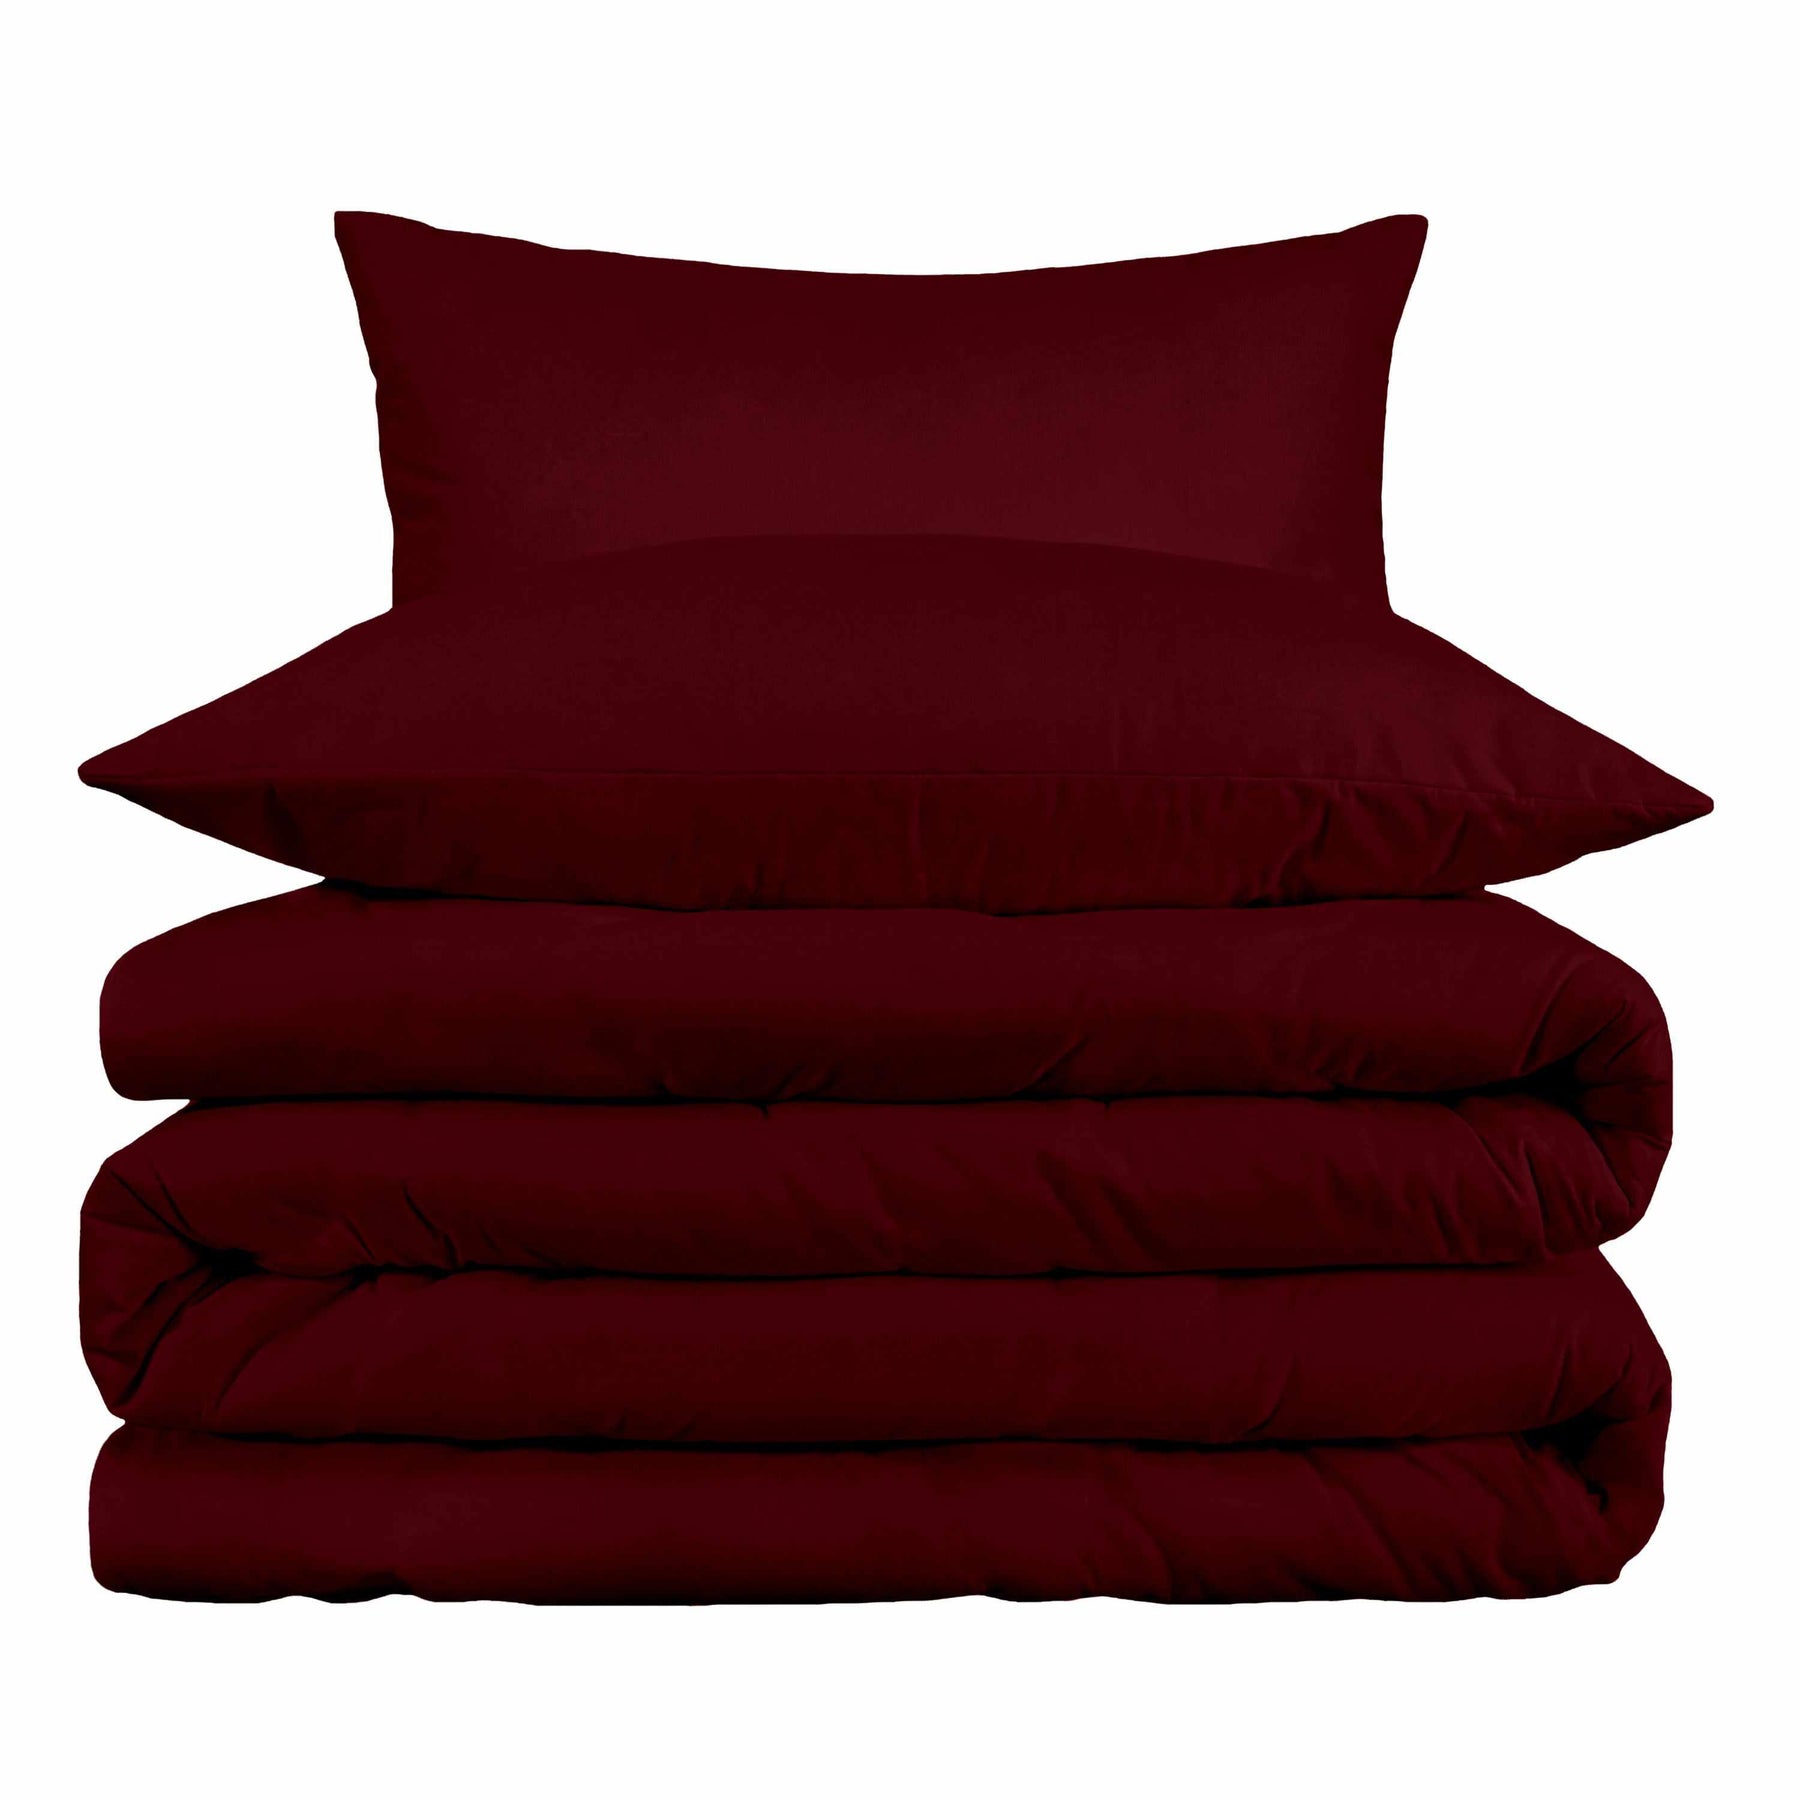  Superior Egyptian Cotton Solid All-Season Duvet Cover Set with Button Closure - Burgundy